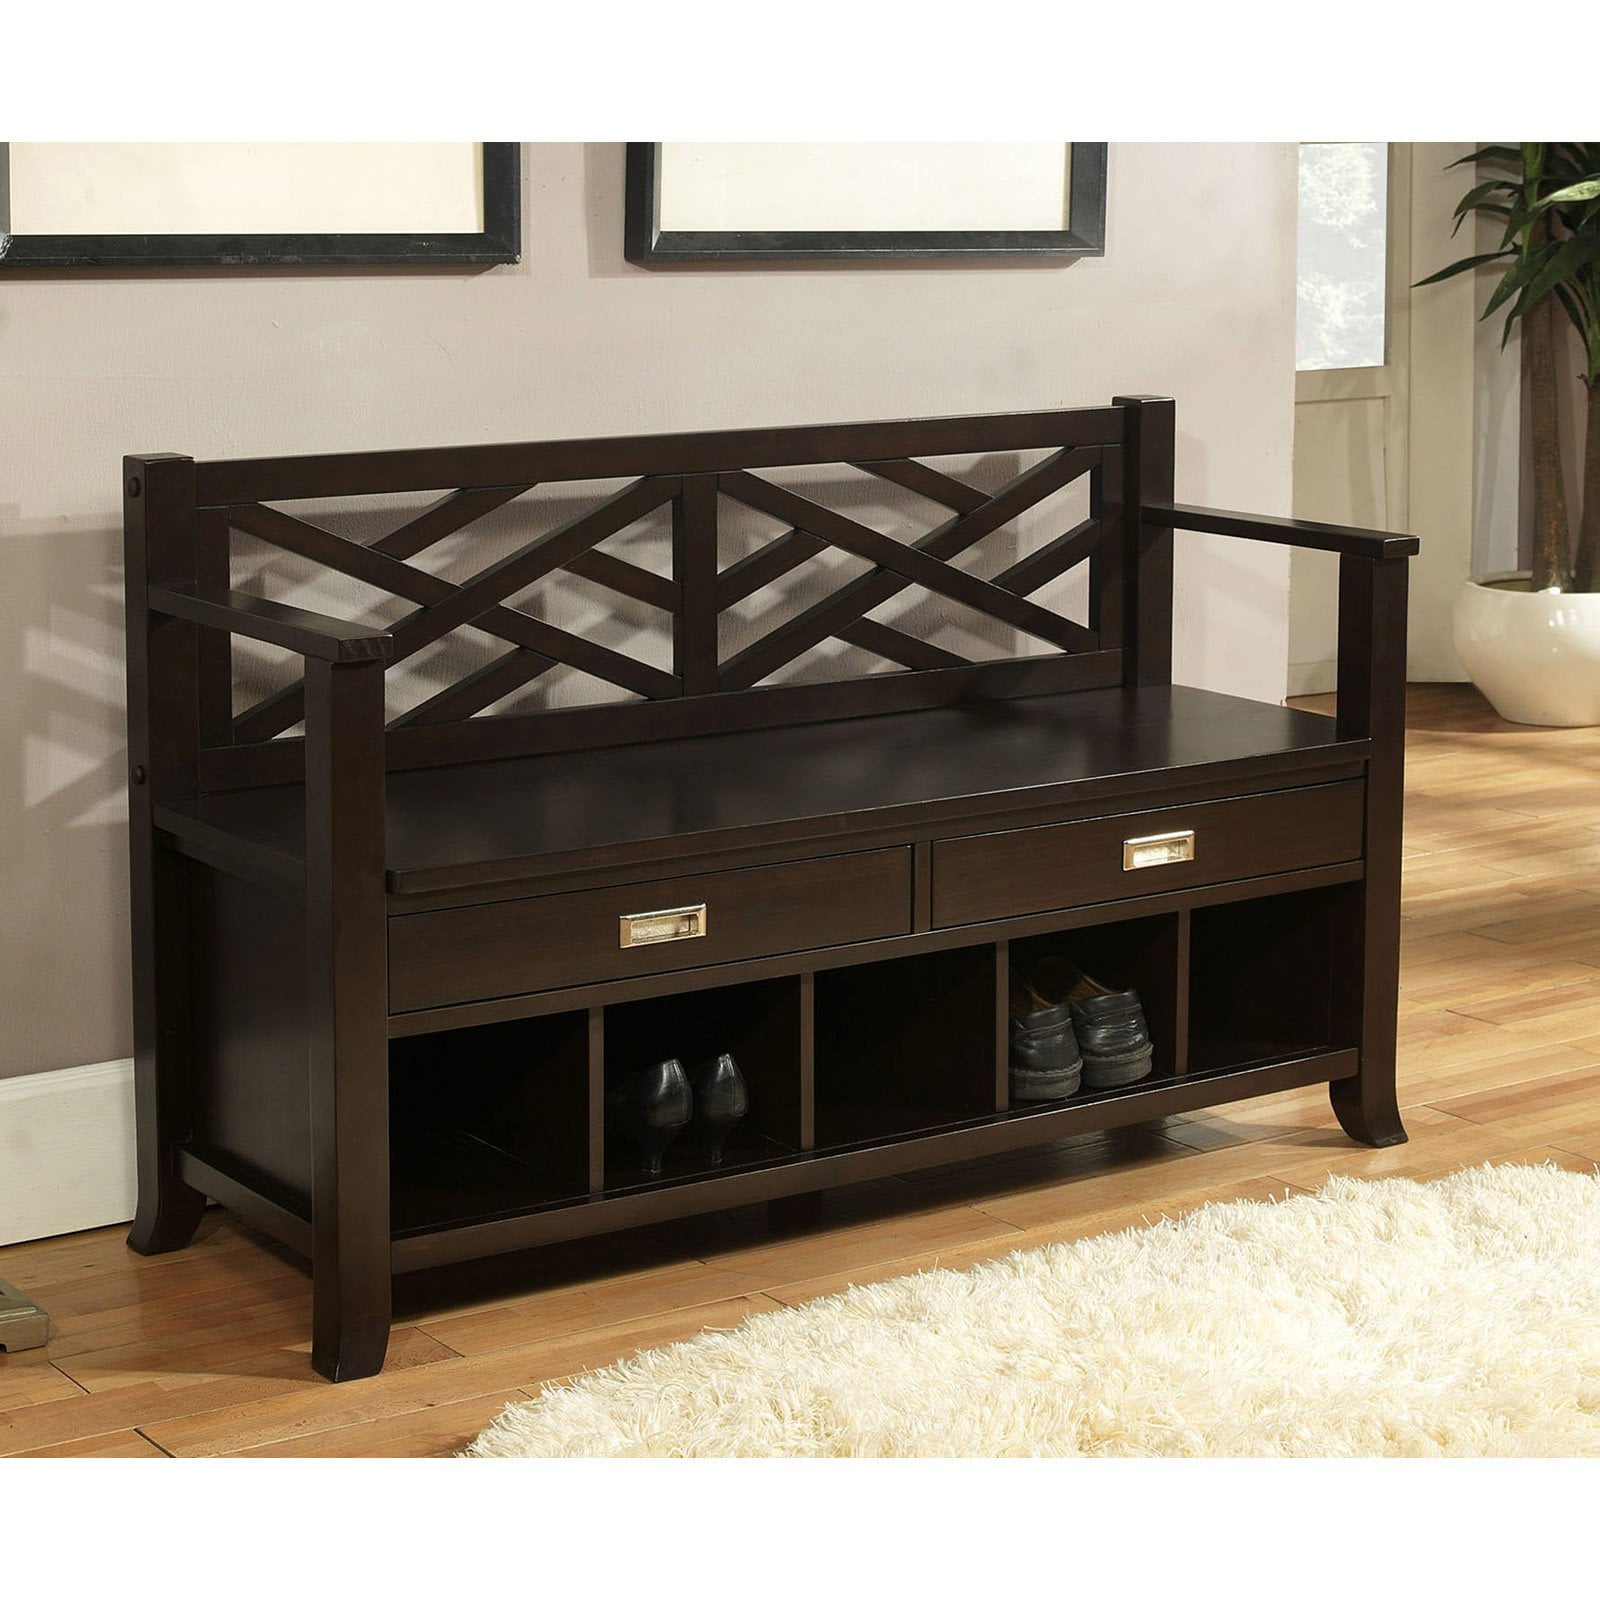 Simpli Home Sea Mills Entryway Storage Bench With Drawers Cubbies Walmart Com Walmart Com,Diy Christmas Decorations For Your Room